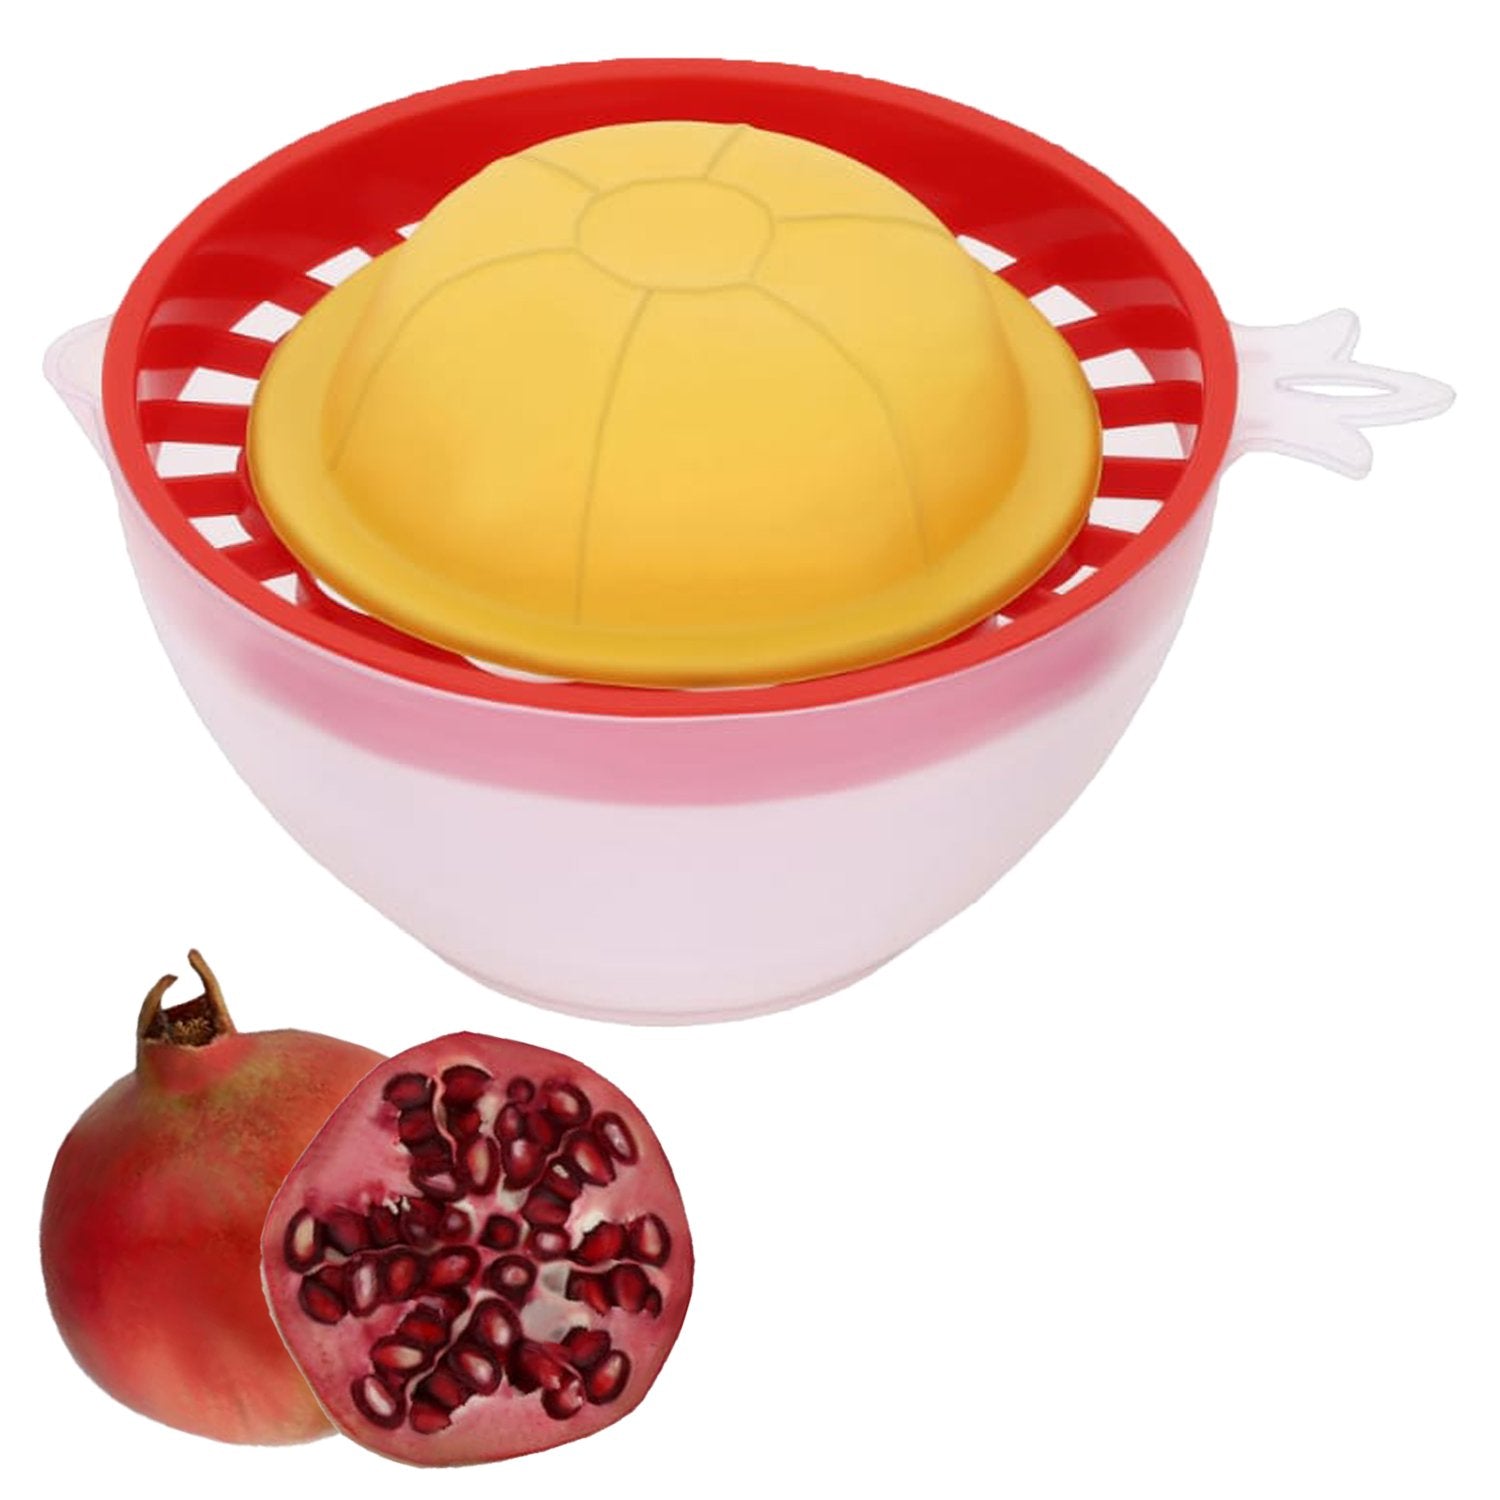 2304 Plastic Pomegranate Seeds Extractor Removal And Mosambi Orange Juicer - SkyShopy